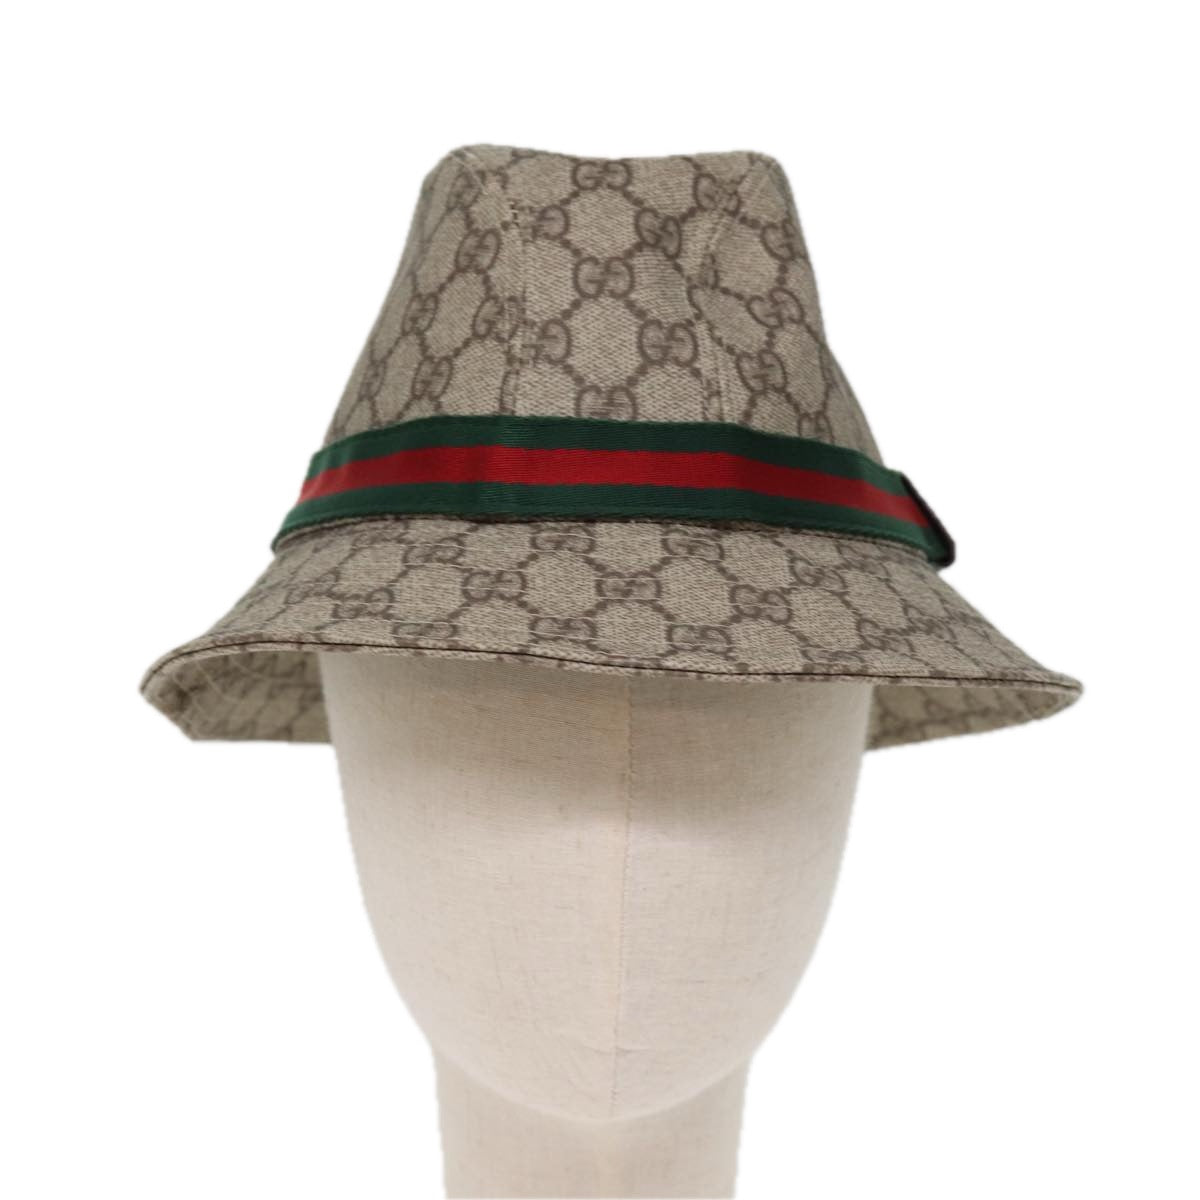 GUCCI GG Supreme Web Sherry Line Hat PVC M Beige Red Green Auth yk12592 - 0